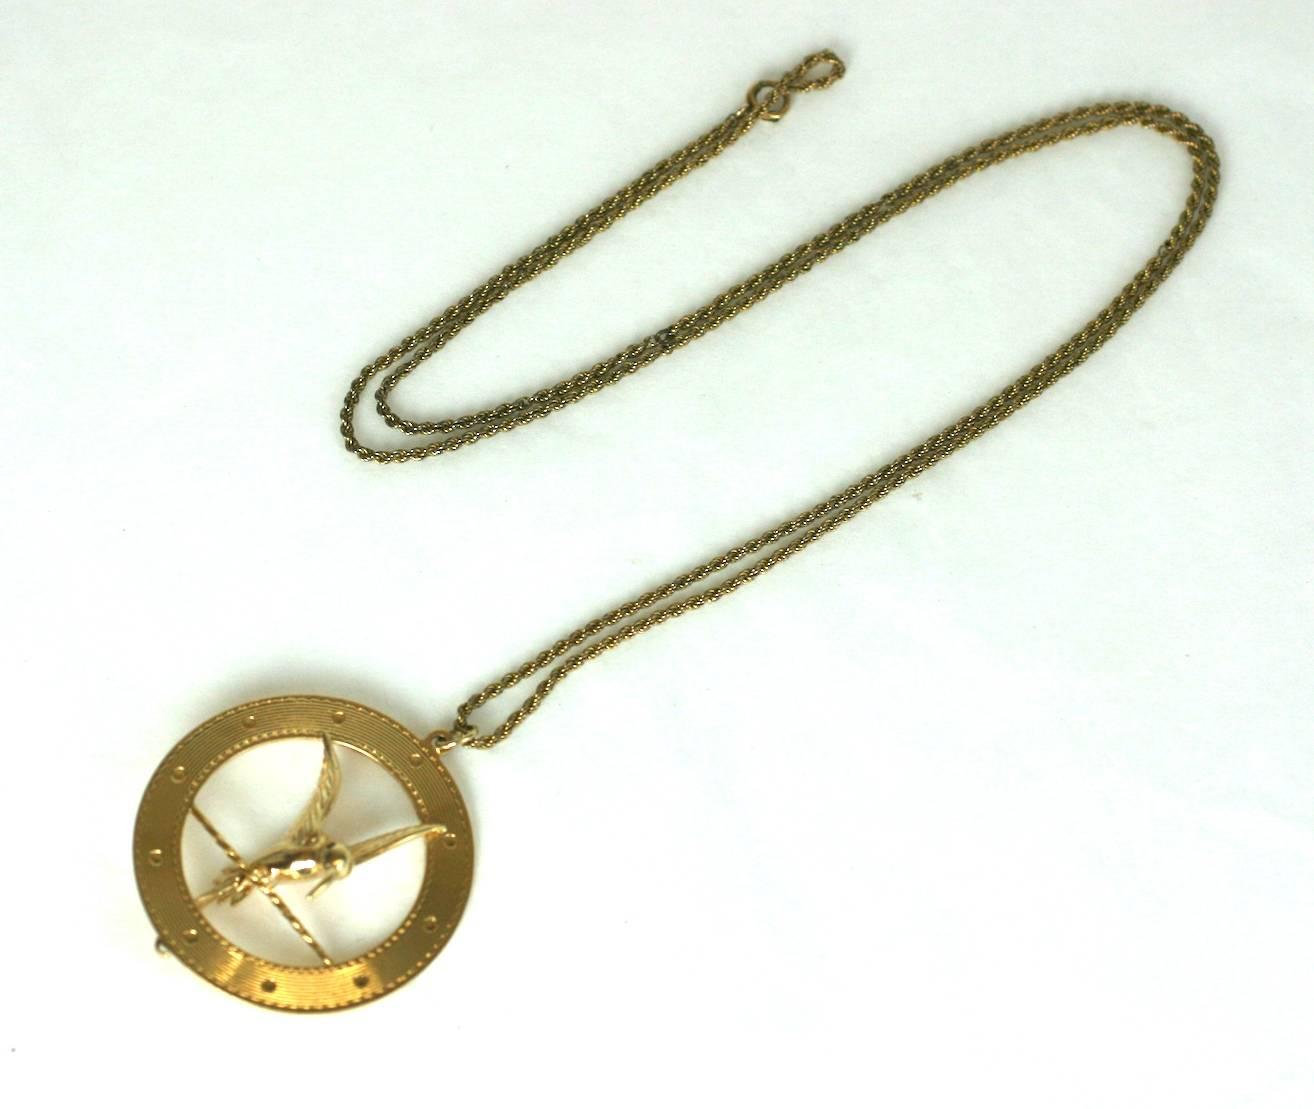 Large, fun gold charm of a Mocking Jay or Hummingbird from the 1950's. Bird is perched on bar in flight mode within a ribbed circle, all rendered in heavy 14k gold with a ruby eye. Well designed with the tip of its tail peeking out below hoop.
Chain